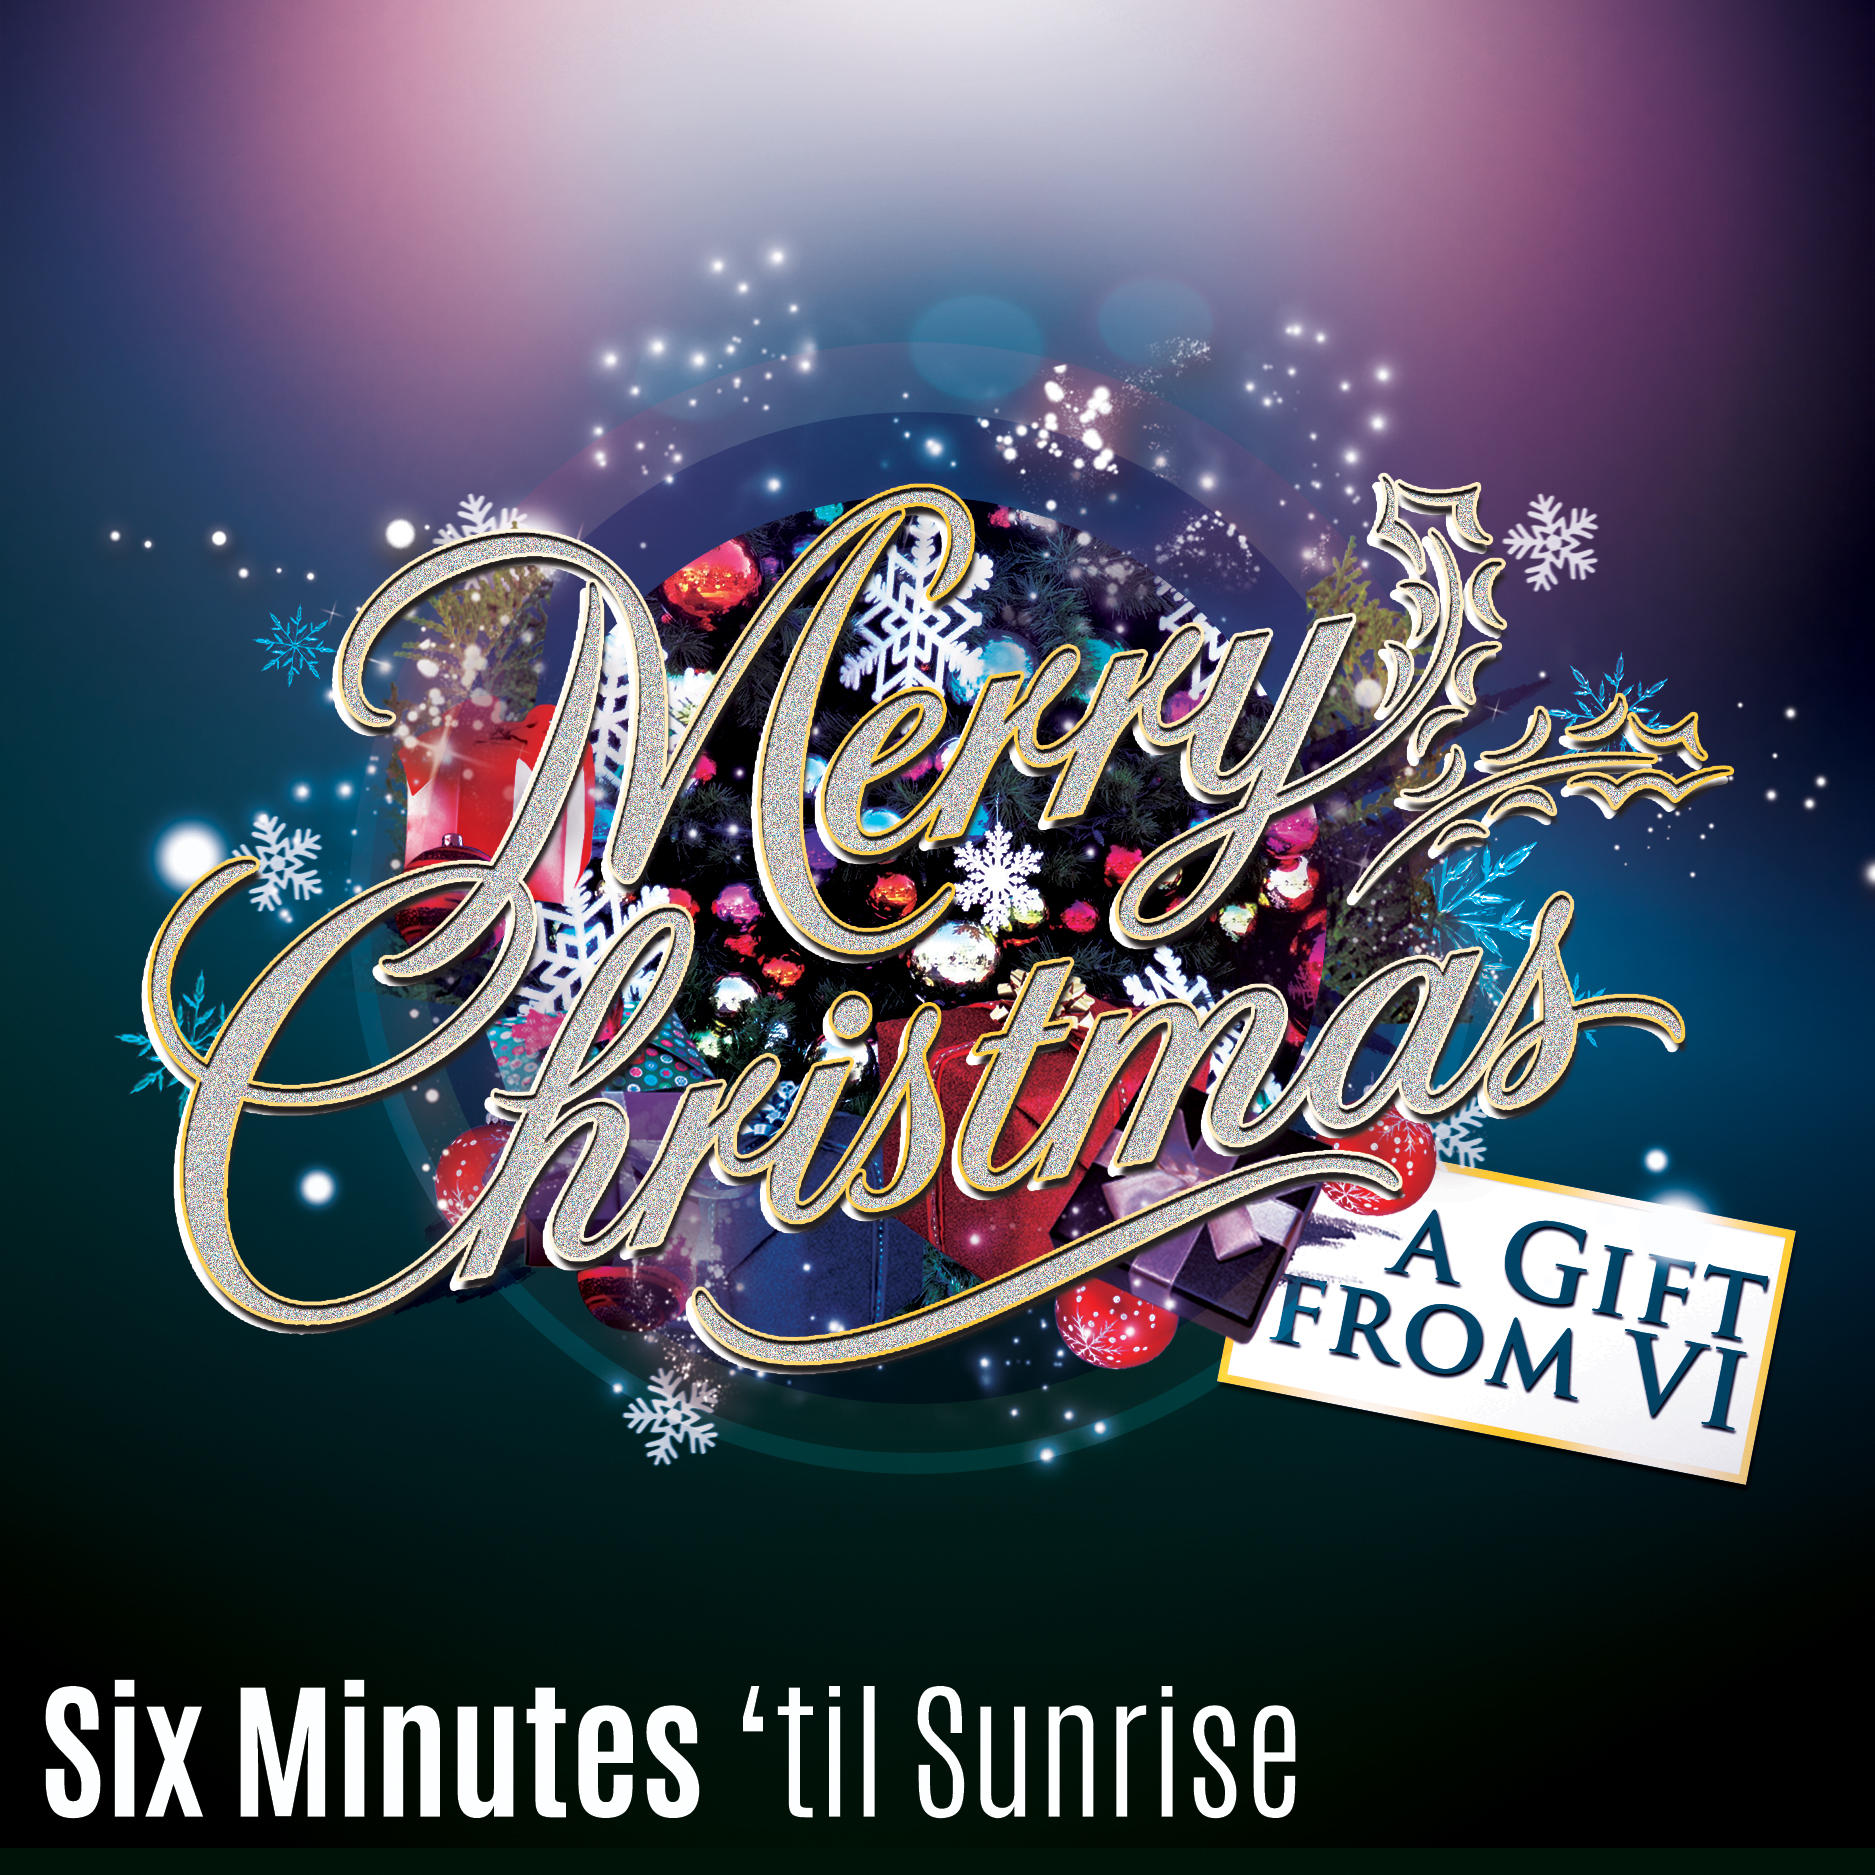 Six Minutes ’til Sunrise – Merry Christmas: A Gift From VI